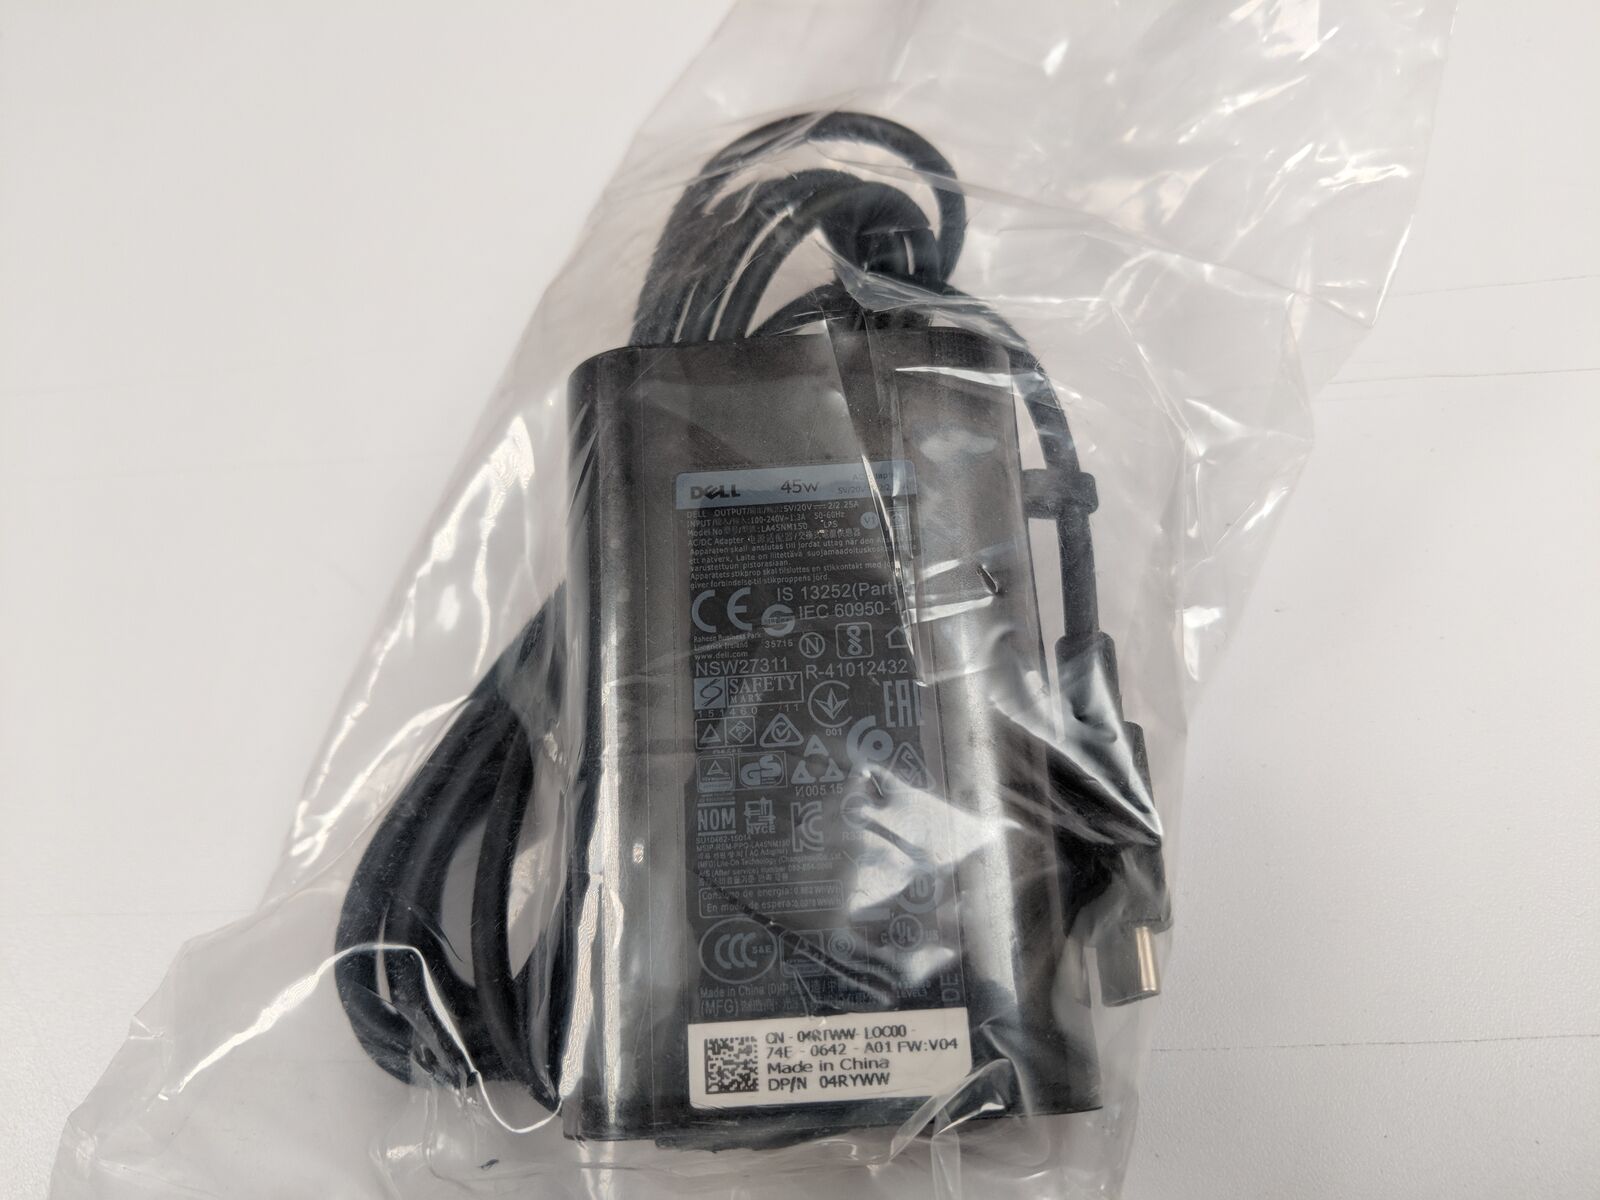 Dell 45W AC Adapter Charger USB-C Type C XPS 13 9365 9370 9380 9300 9310 MPN: LA45NM150 689C4 HDCY5 8XTW5 Brand: Del